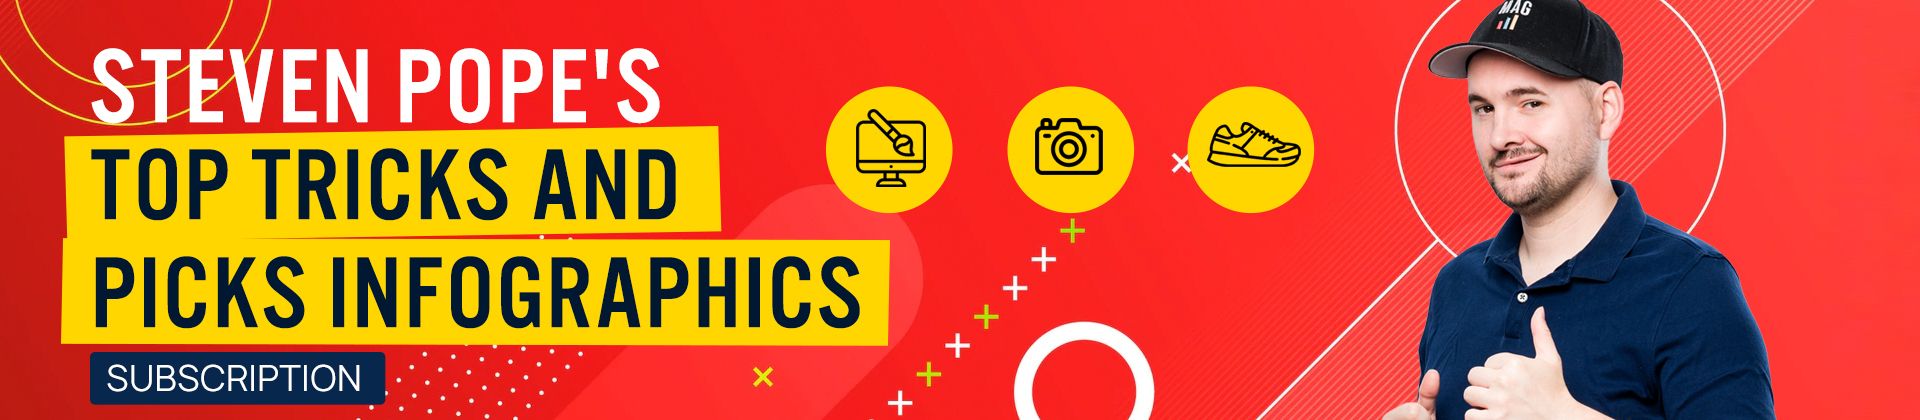 Stiven Pope's Top Tricks and picks infographics course 